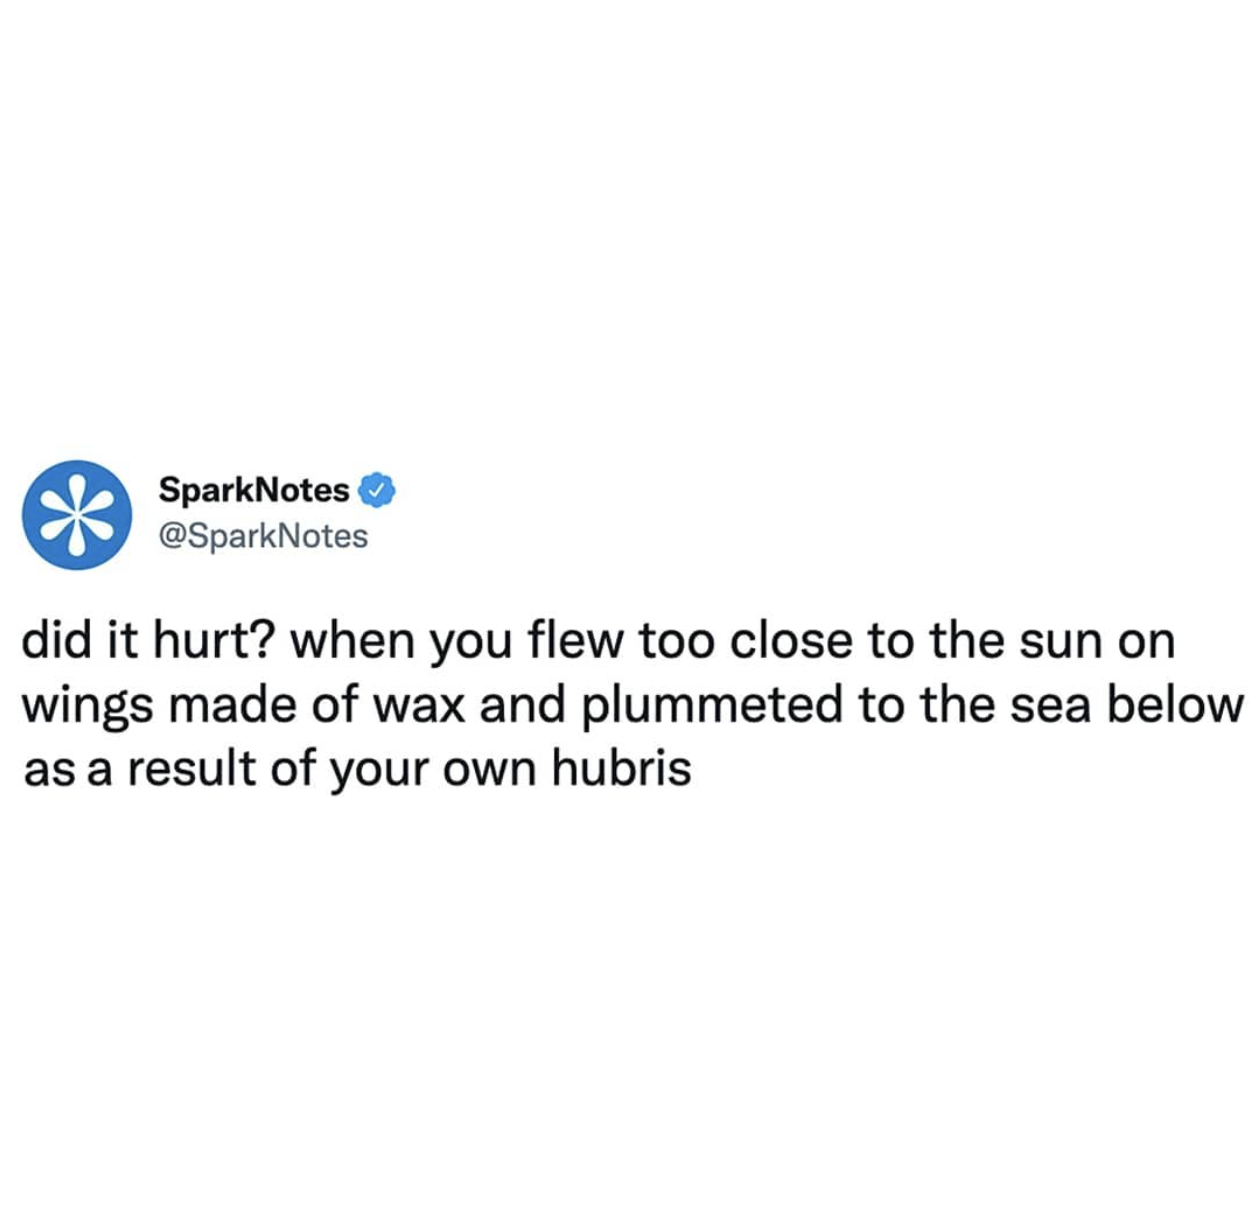 SparkNotes memes - organization - SparkNotes did it hurt? when you flew too close to the sun on wings made of wax and plummeted to the sea below as a result of your own hubris